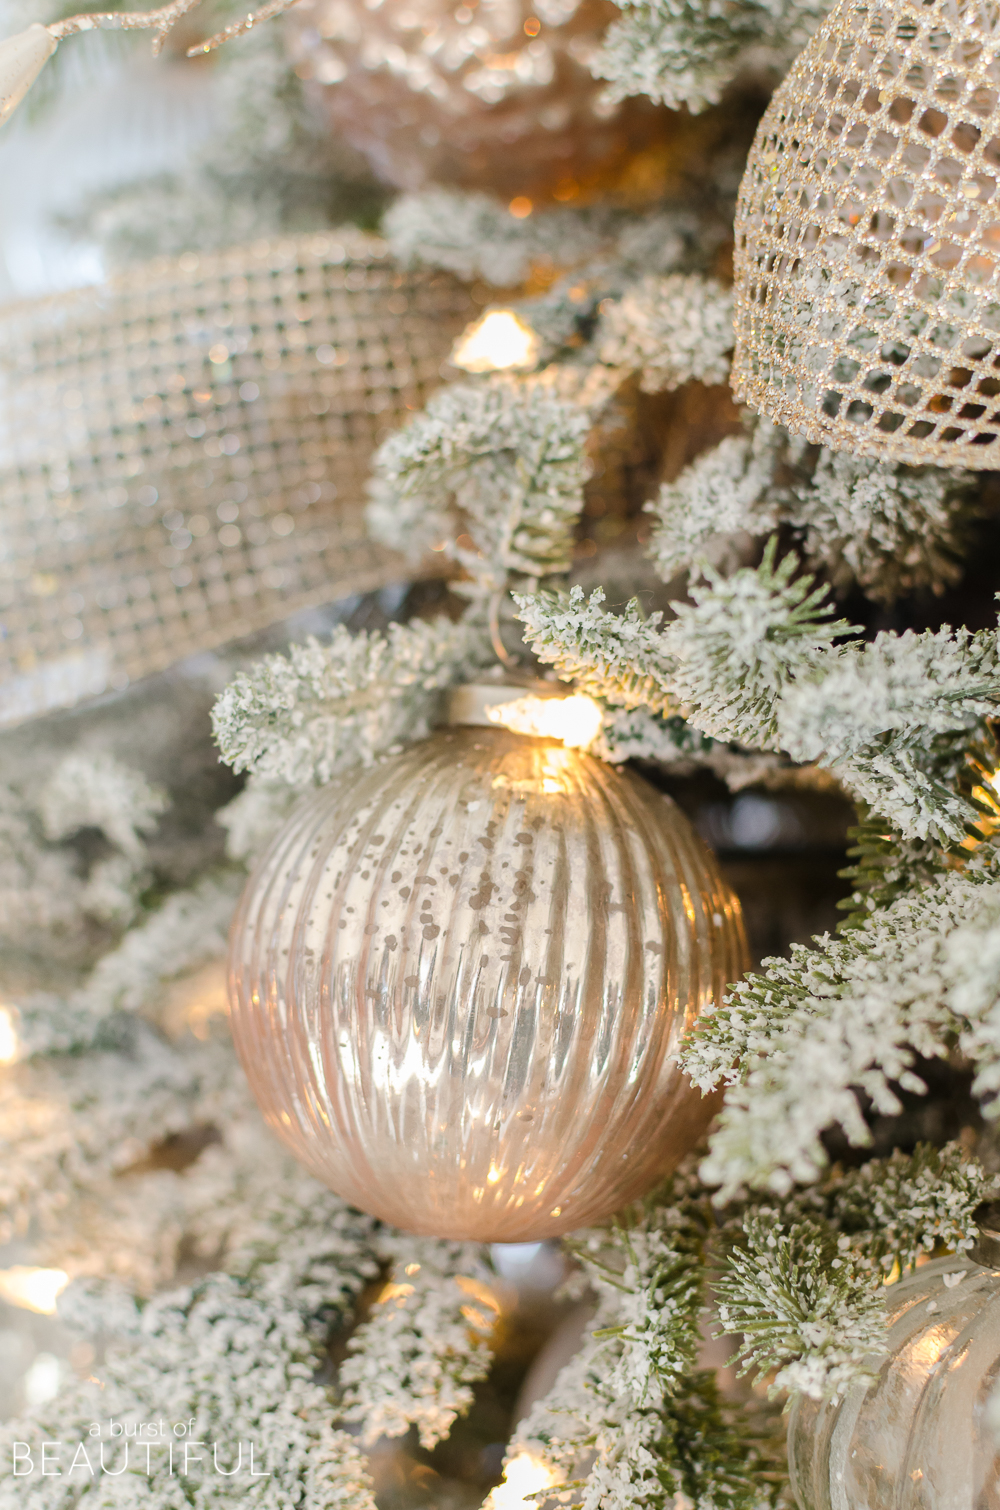 A snowy flocked Christmas tree decorated in silver and rose gold adds a big dose of holiday cheer to this modern farmhouse living room